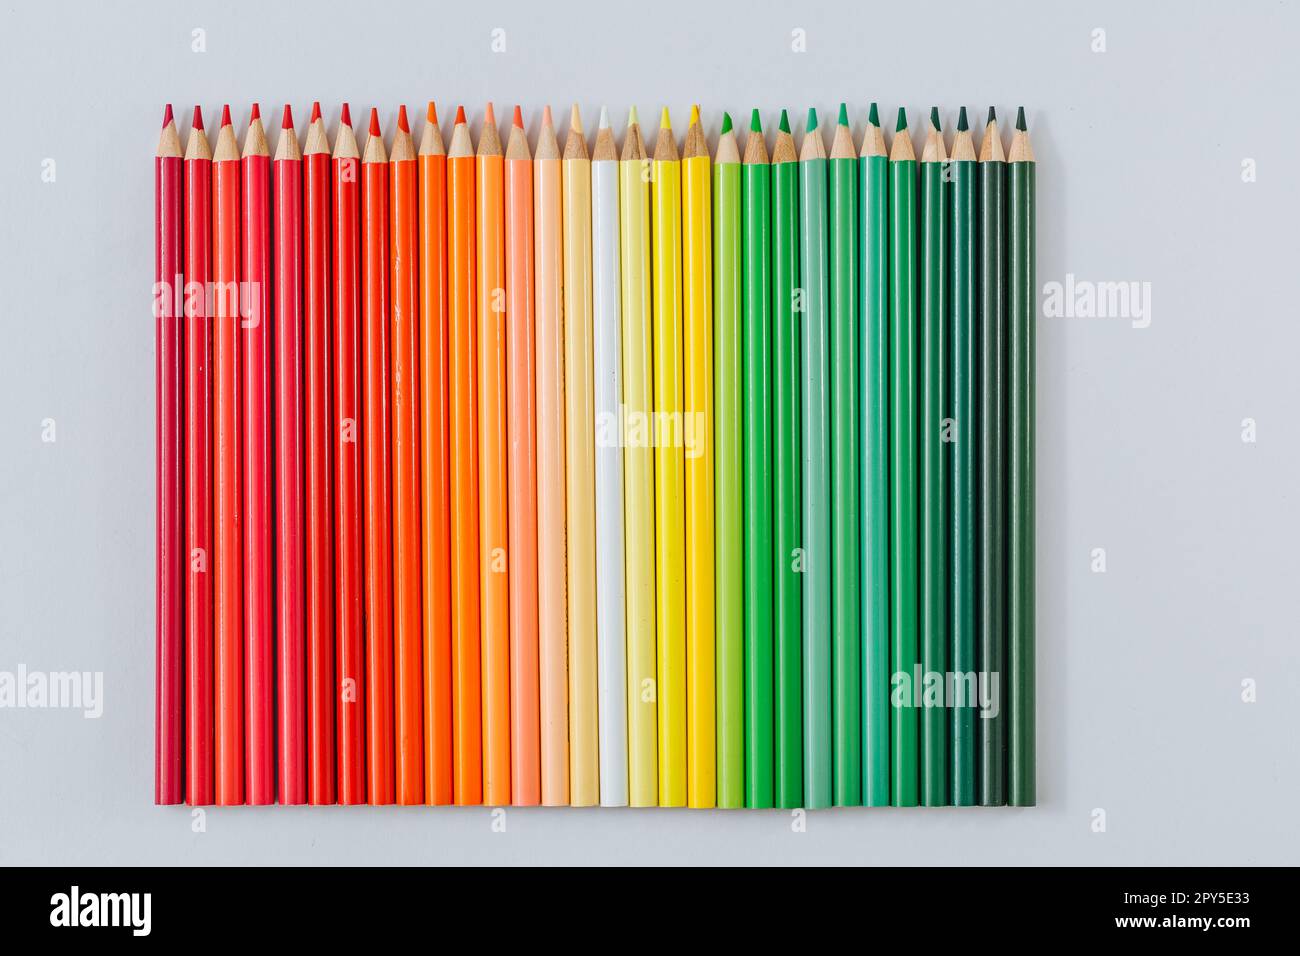 Colored multicolored wooden pencils on a white background. Stock Photo